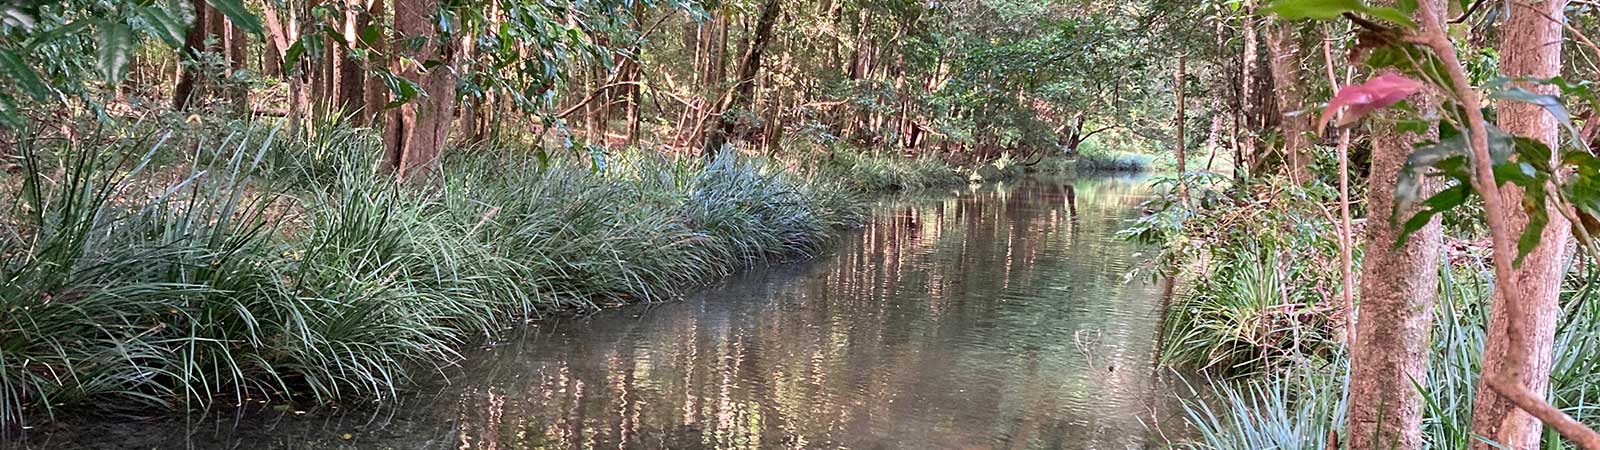 Bellinger River flowing through some reeds and grasses